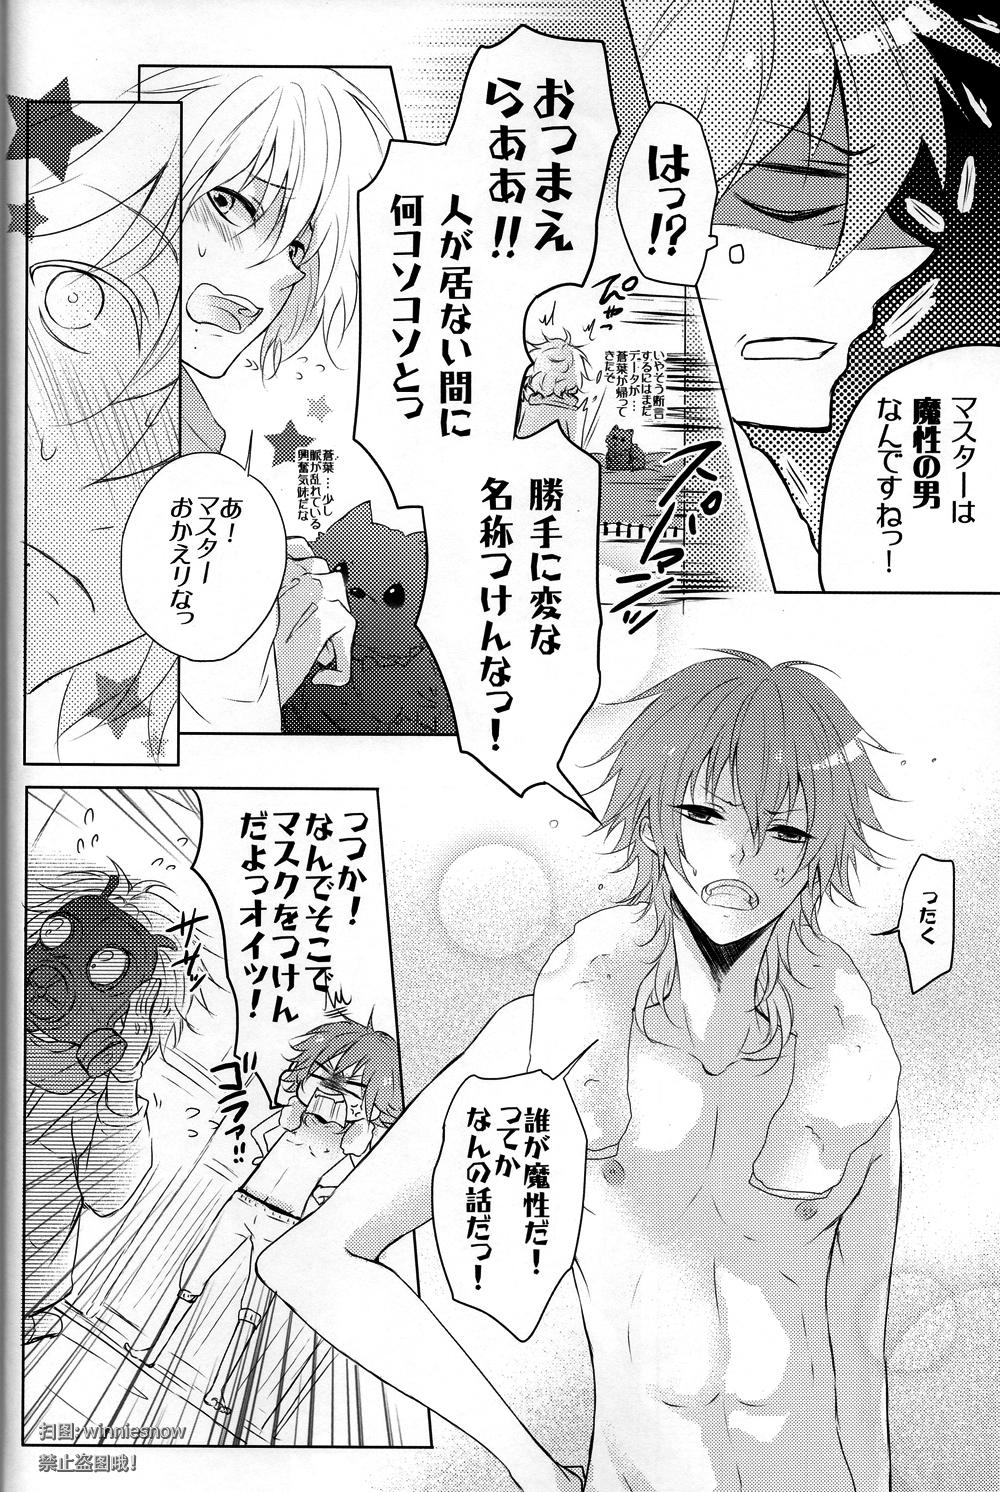 Male Honeycomb - Dramatical murder Messy - Page 3